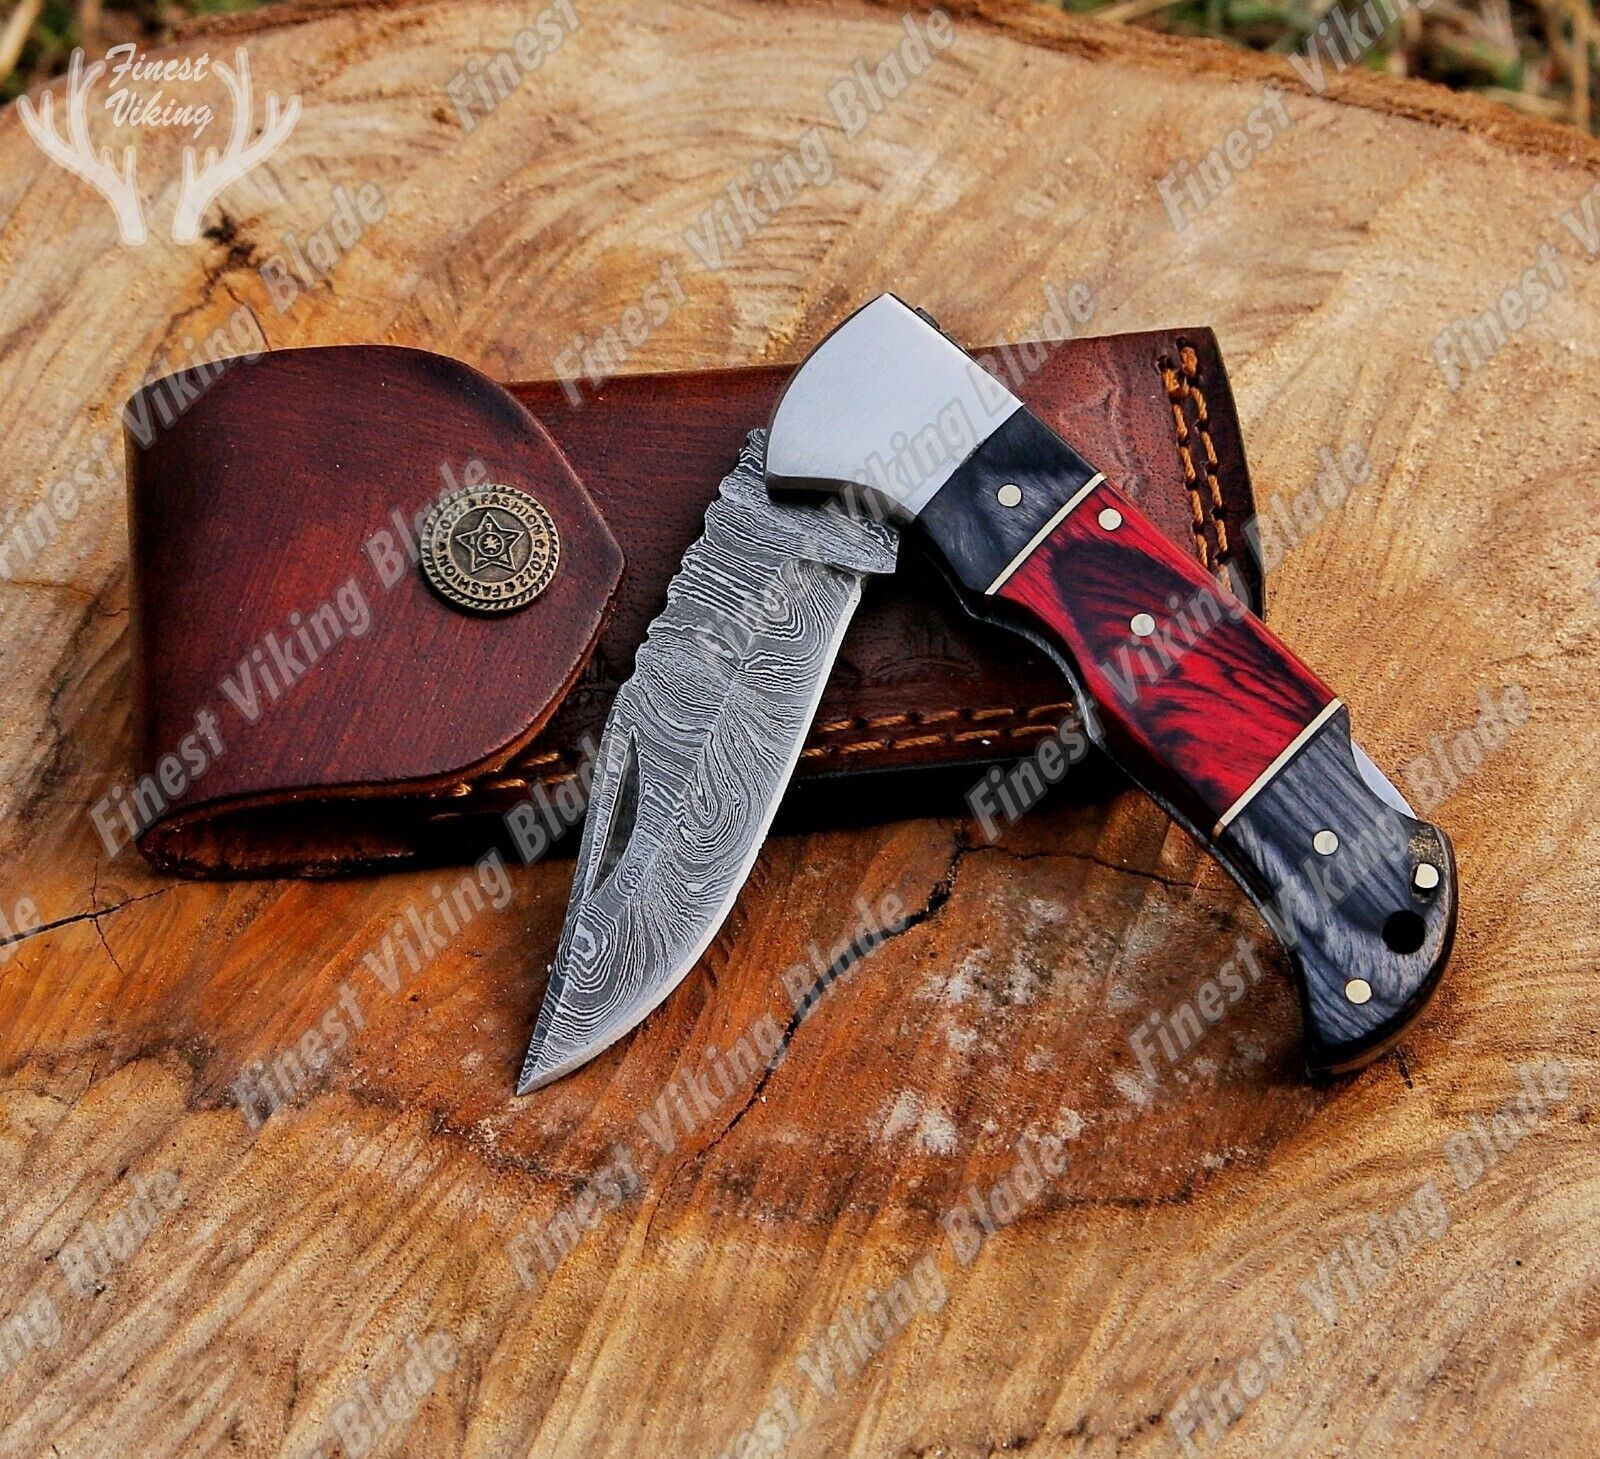 PERSONALIZED HANDMADE DAMASCUS Pocket Knife, Groomsmen, Gift For Any Occasion